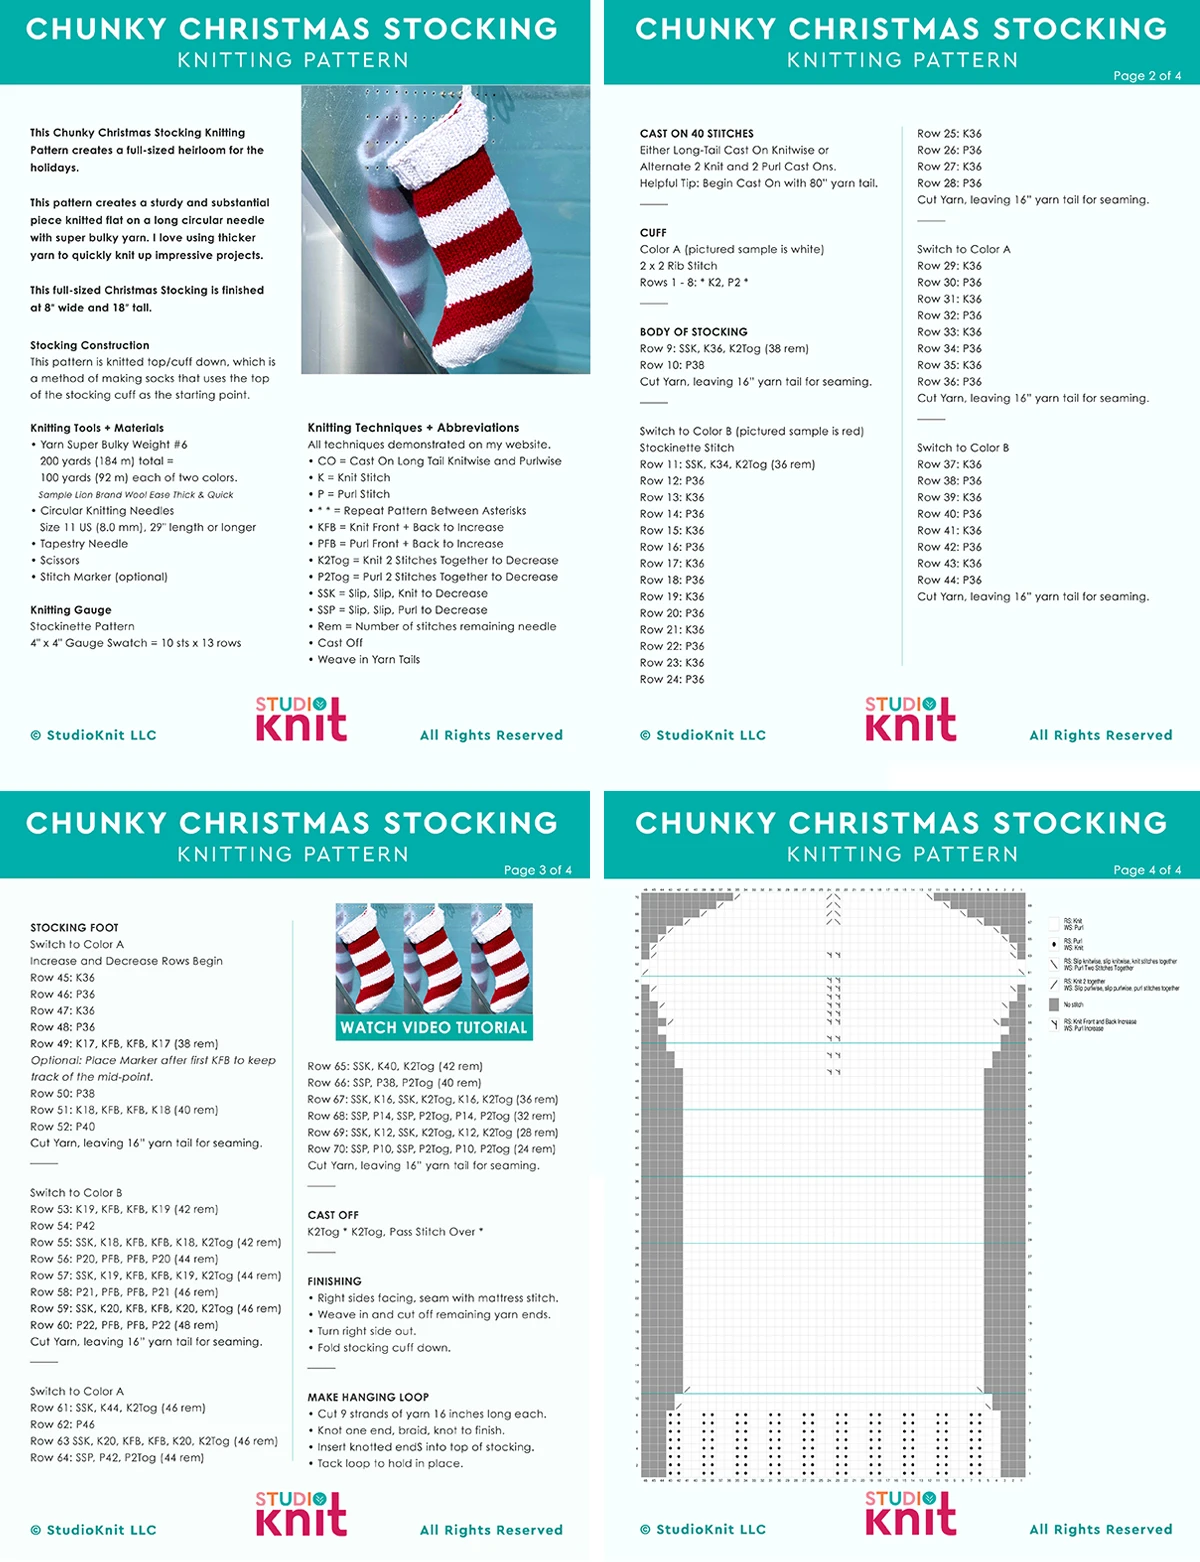 Four pages of Printable Knitting Pattern for Chunky Christmas Stocking by Studio Knit.